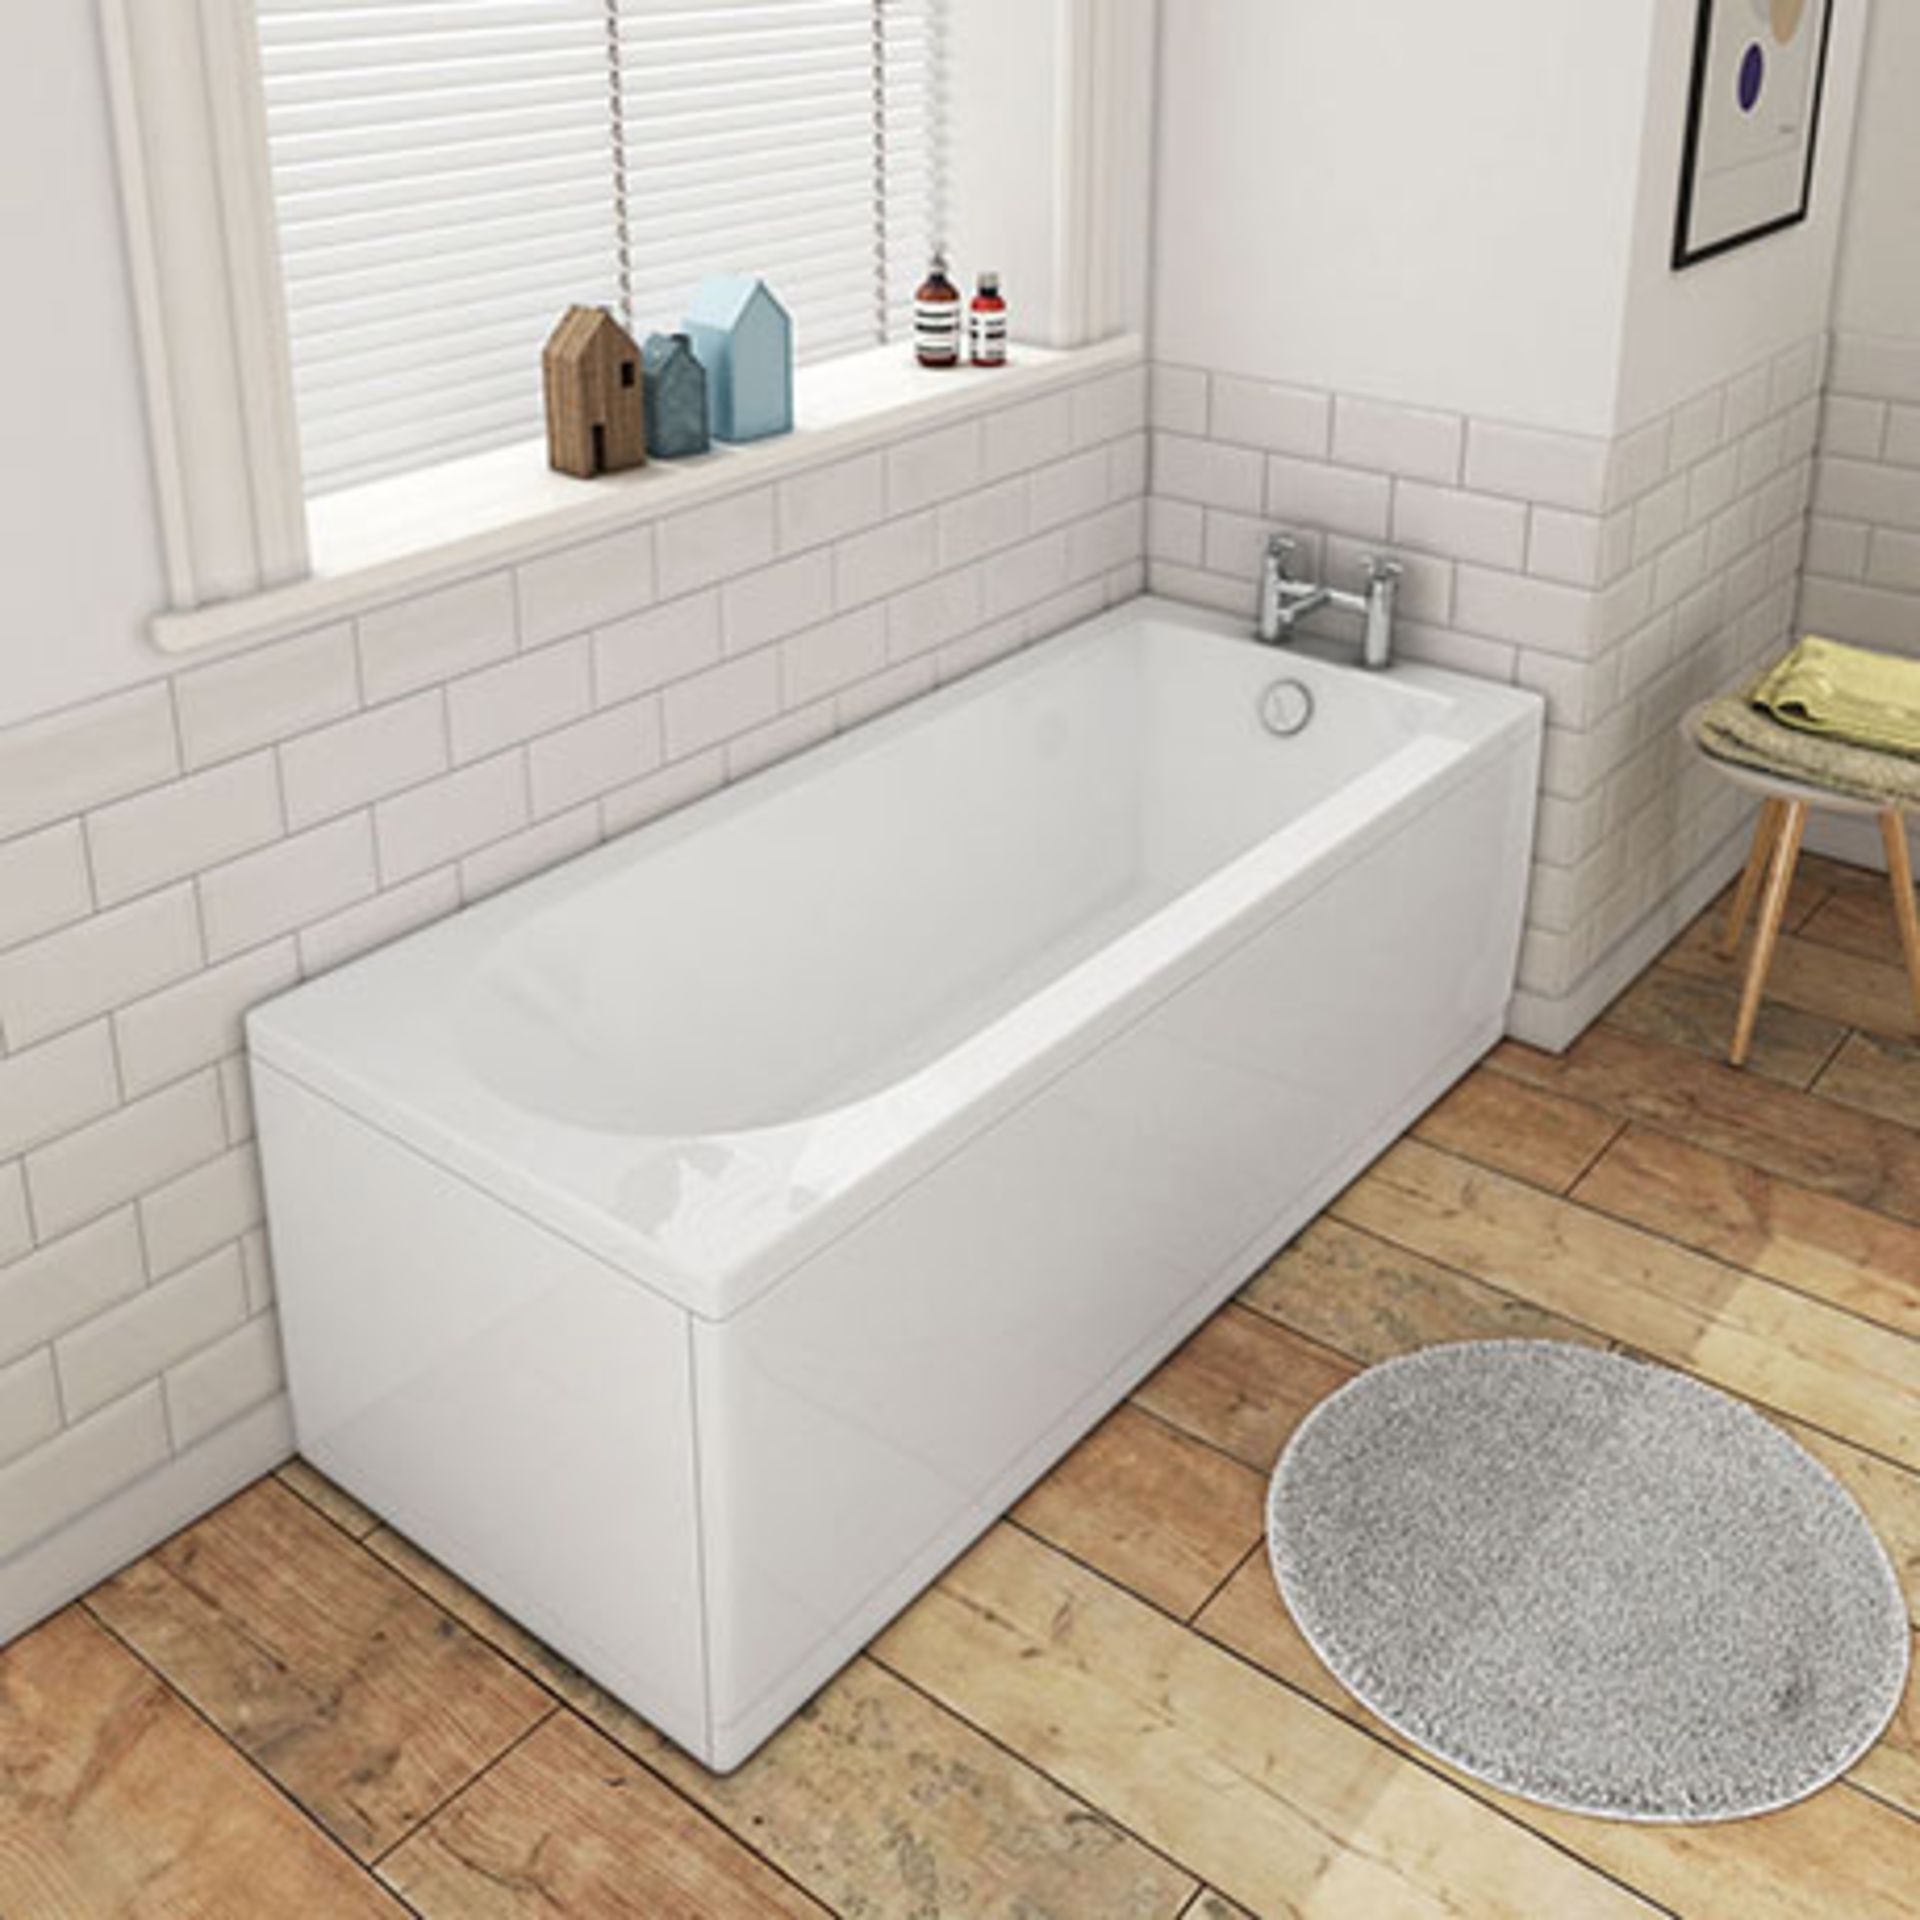 New (L4) 1600 x 700 Round Single Ended Bath. Size: 1600 x 700mm Product Type: Single Ended Bat...